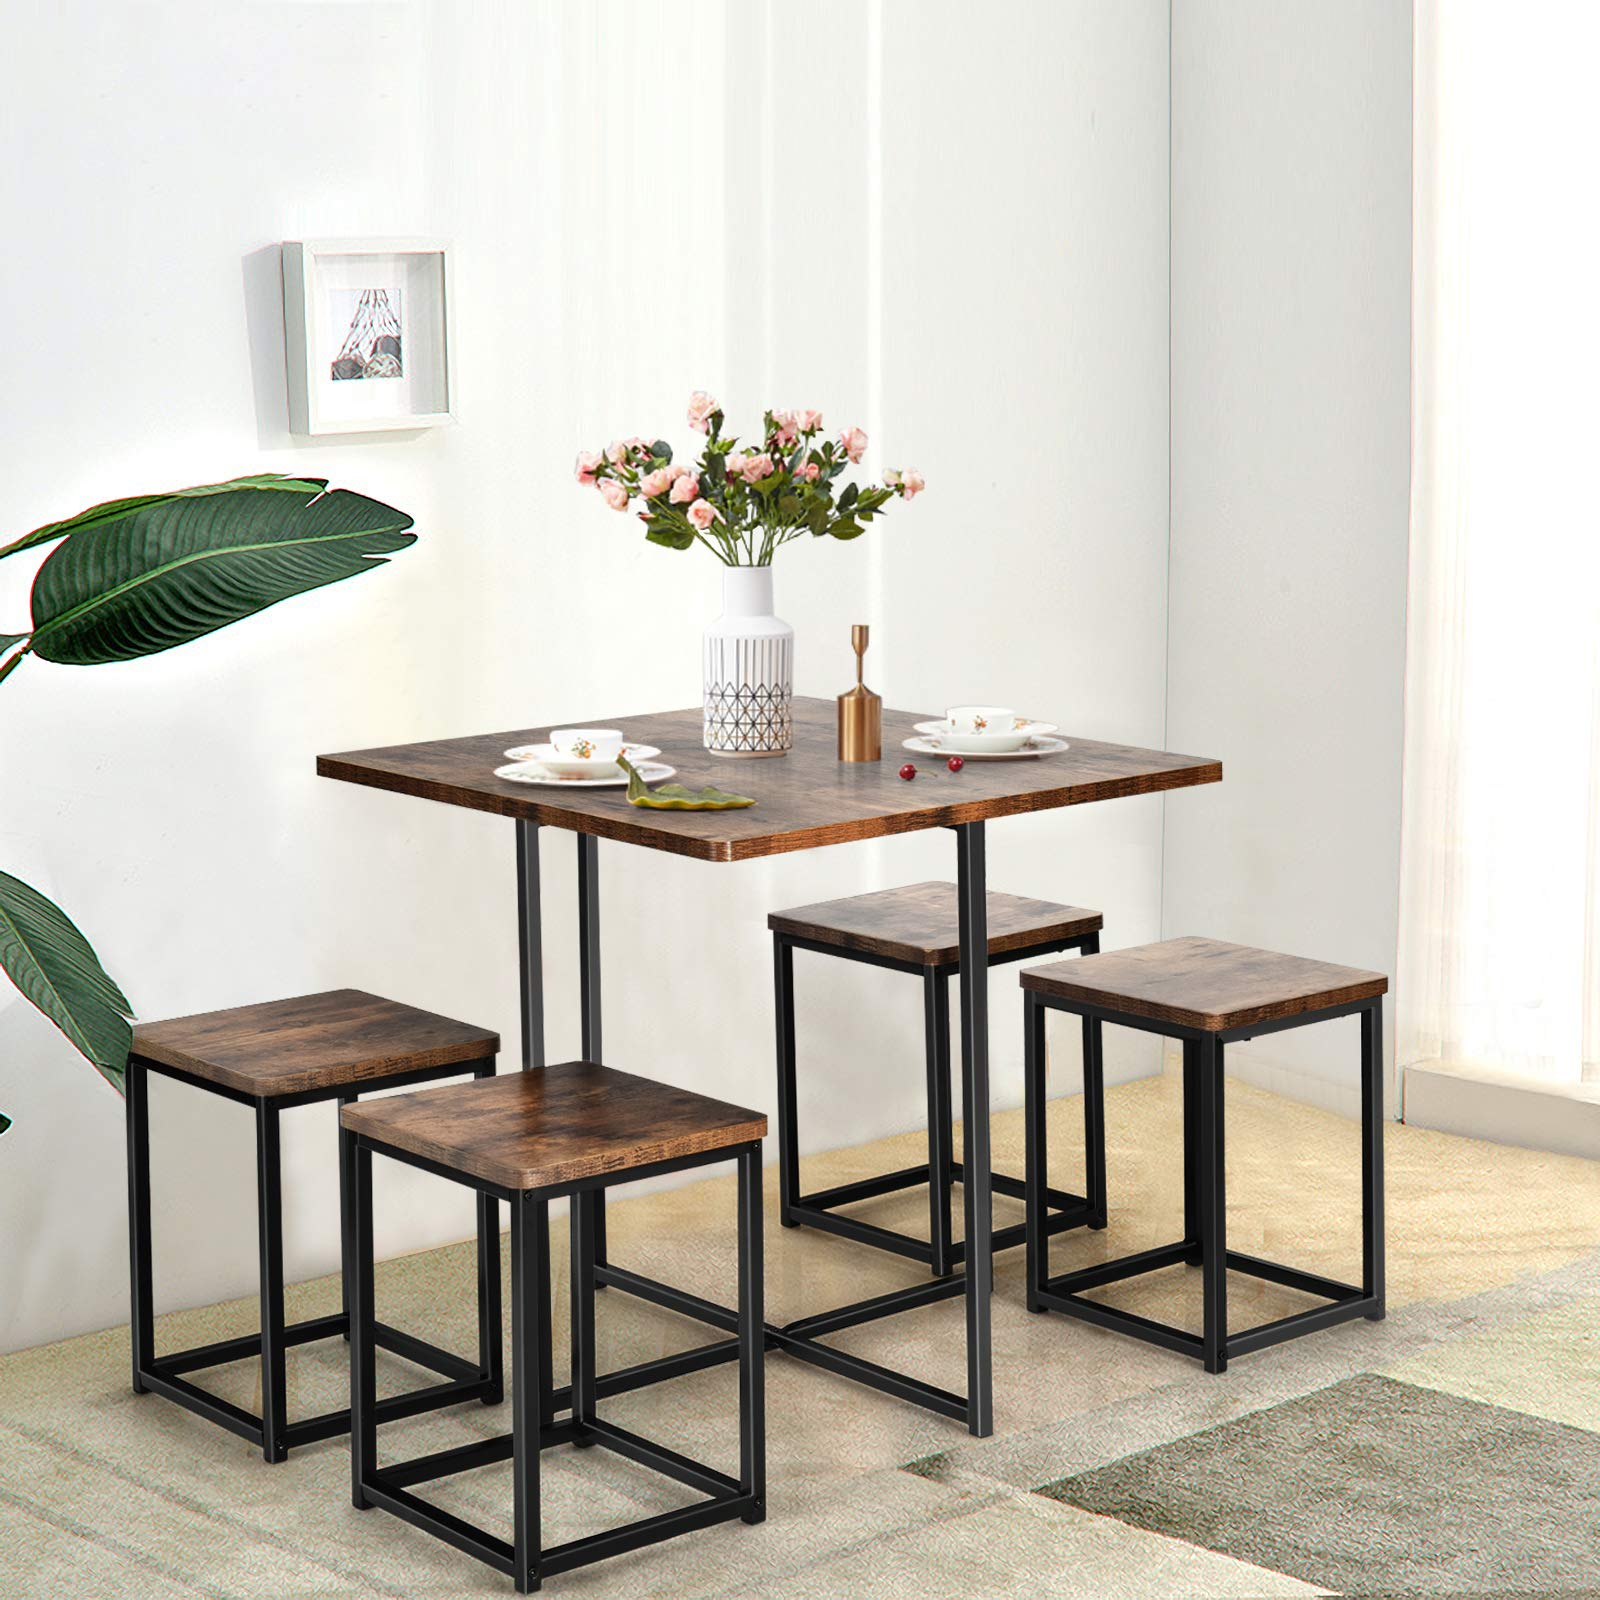 5 Piece Dining Table Set, Dining Set for 4 with Square Stools, Walnut & Black